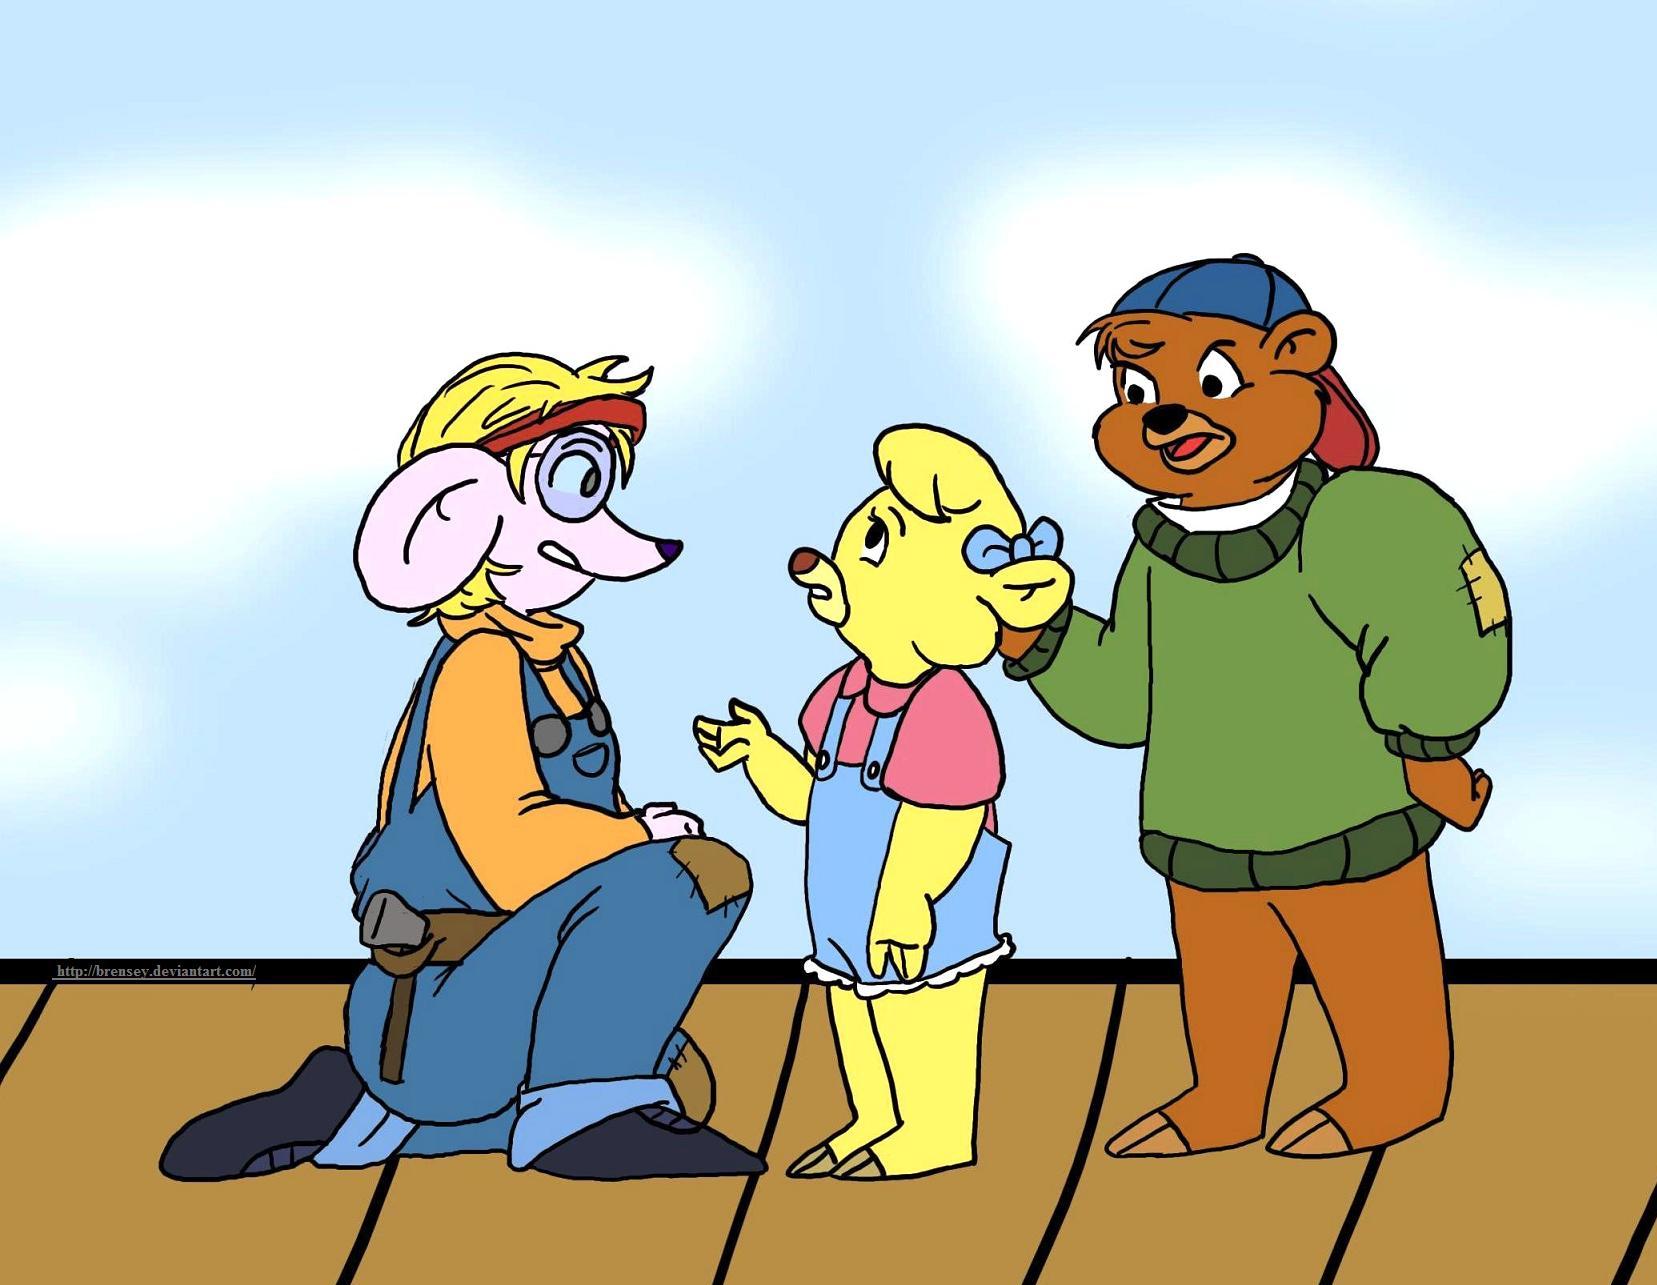 Tablet Test: Penelope, Kit, and Molly